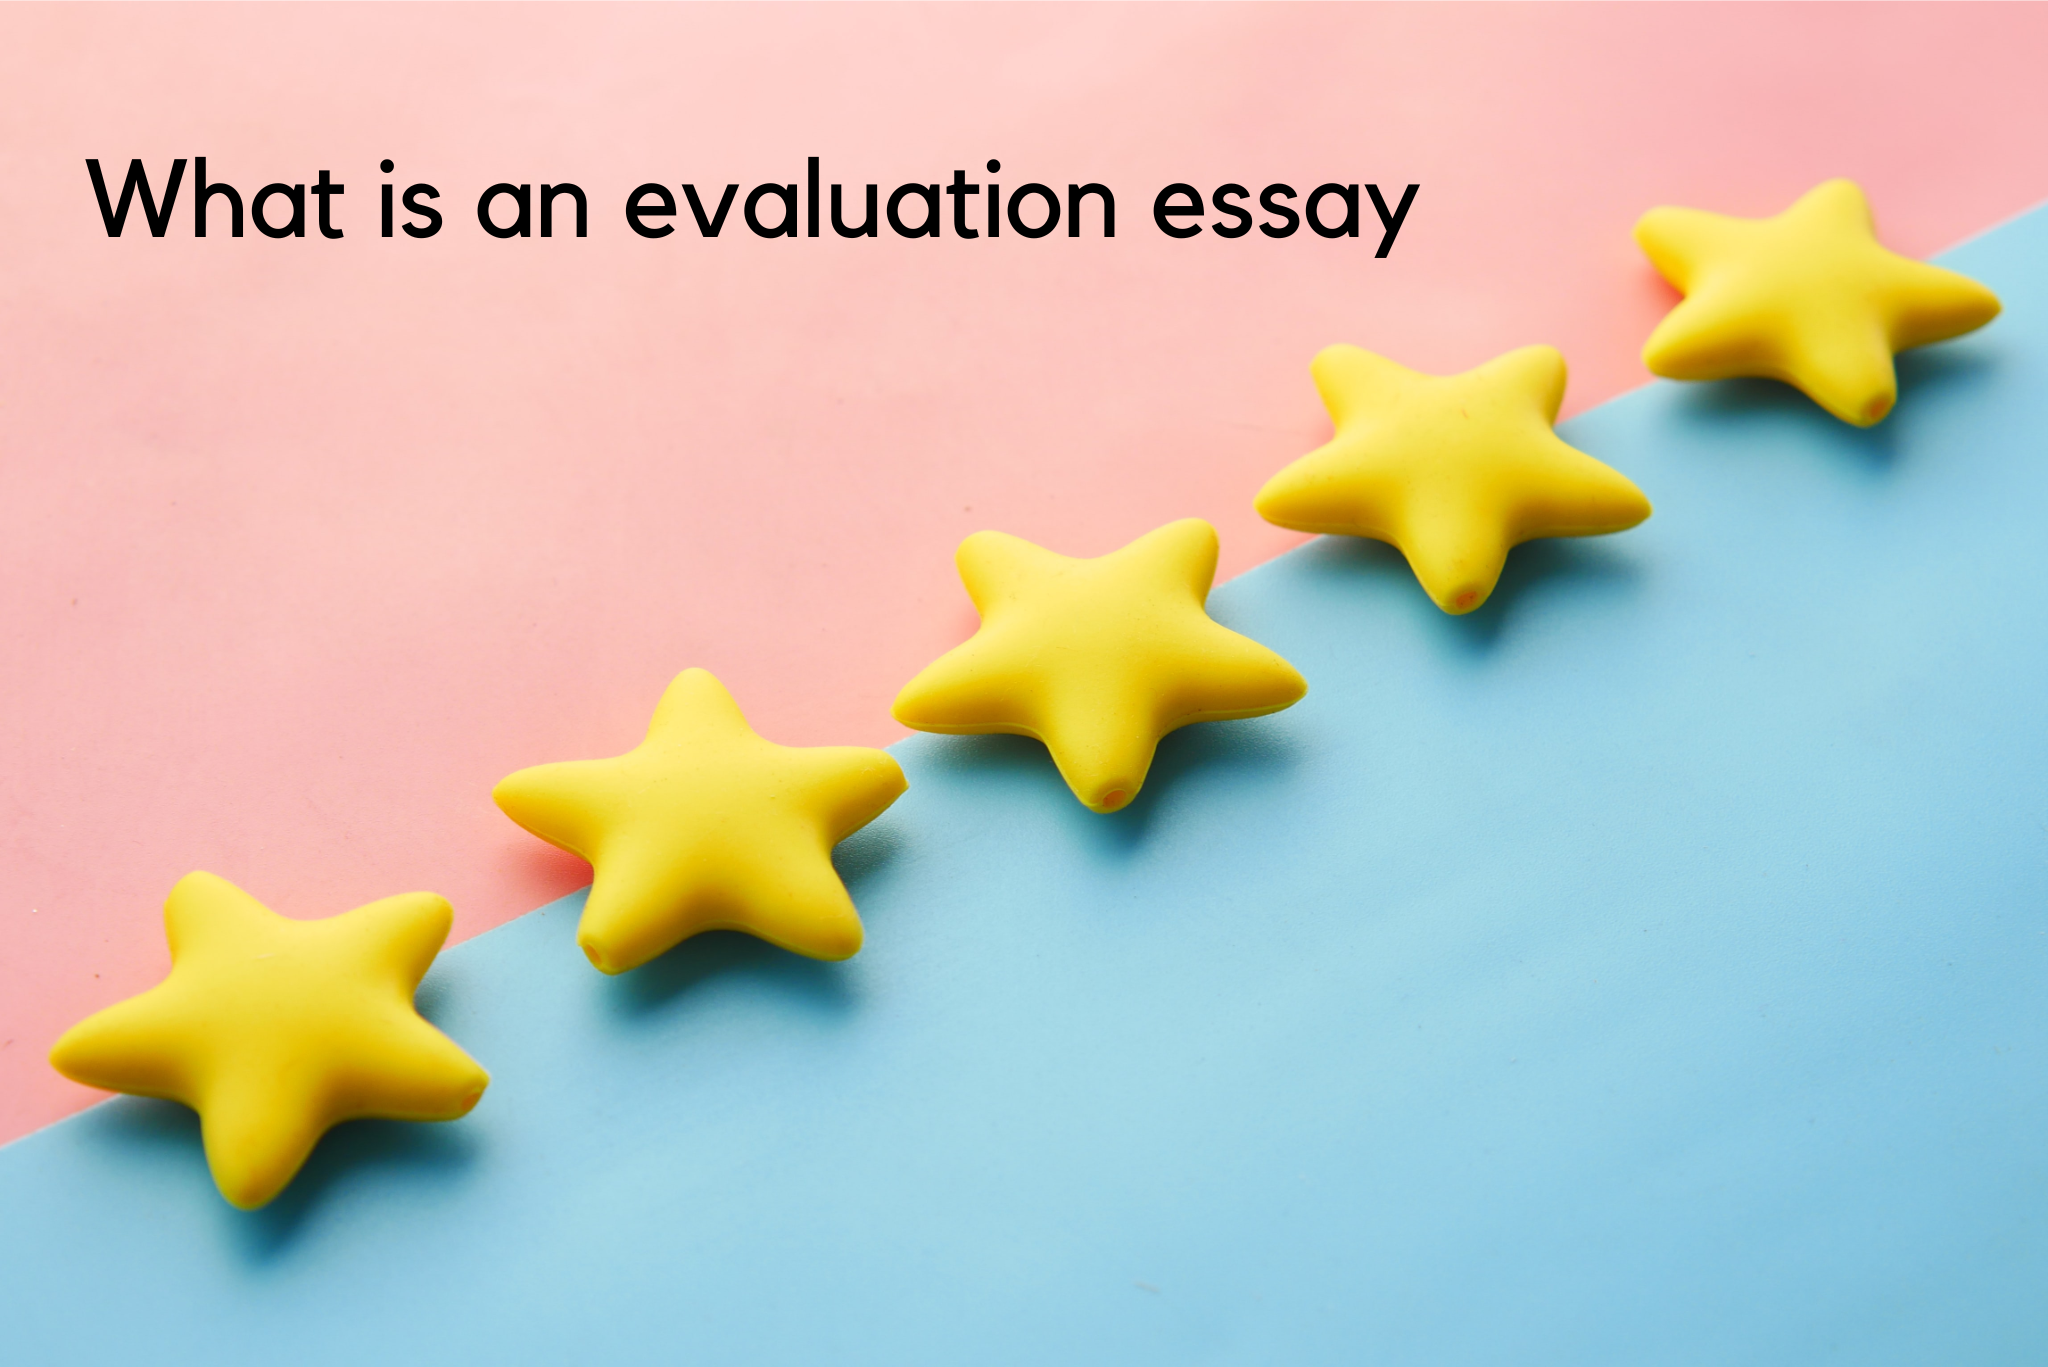 What is evaluation essay